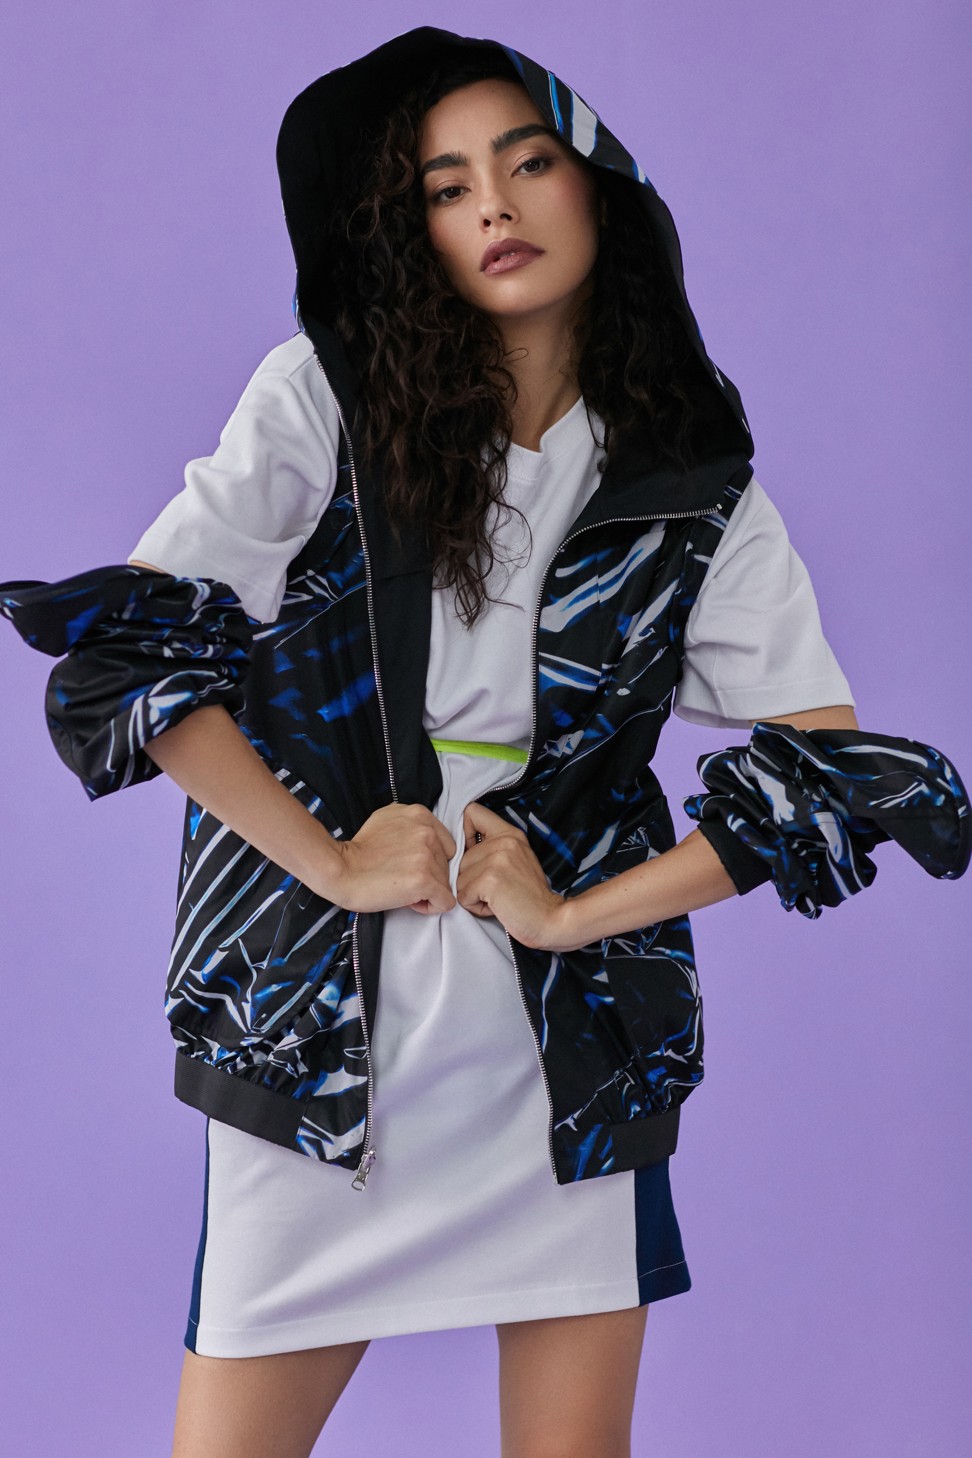 Designer Johanna Ho is determined to make fashion sustainable, from ...